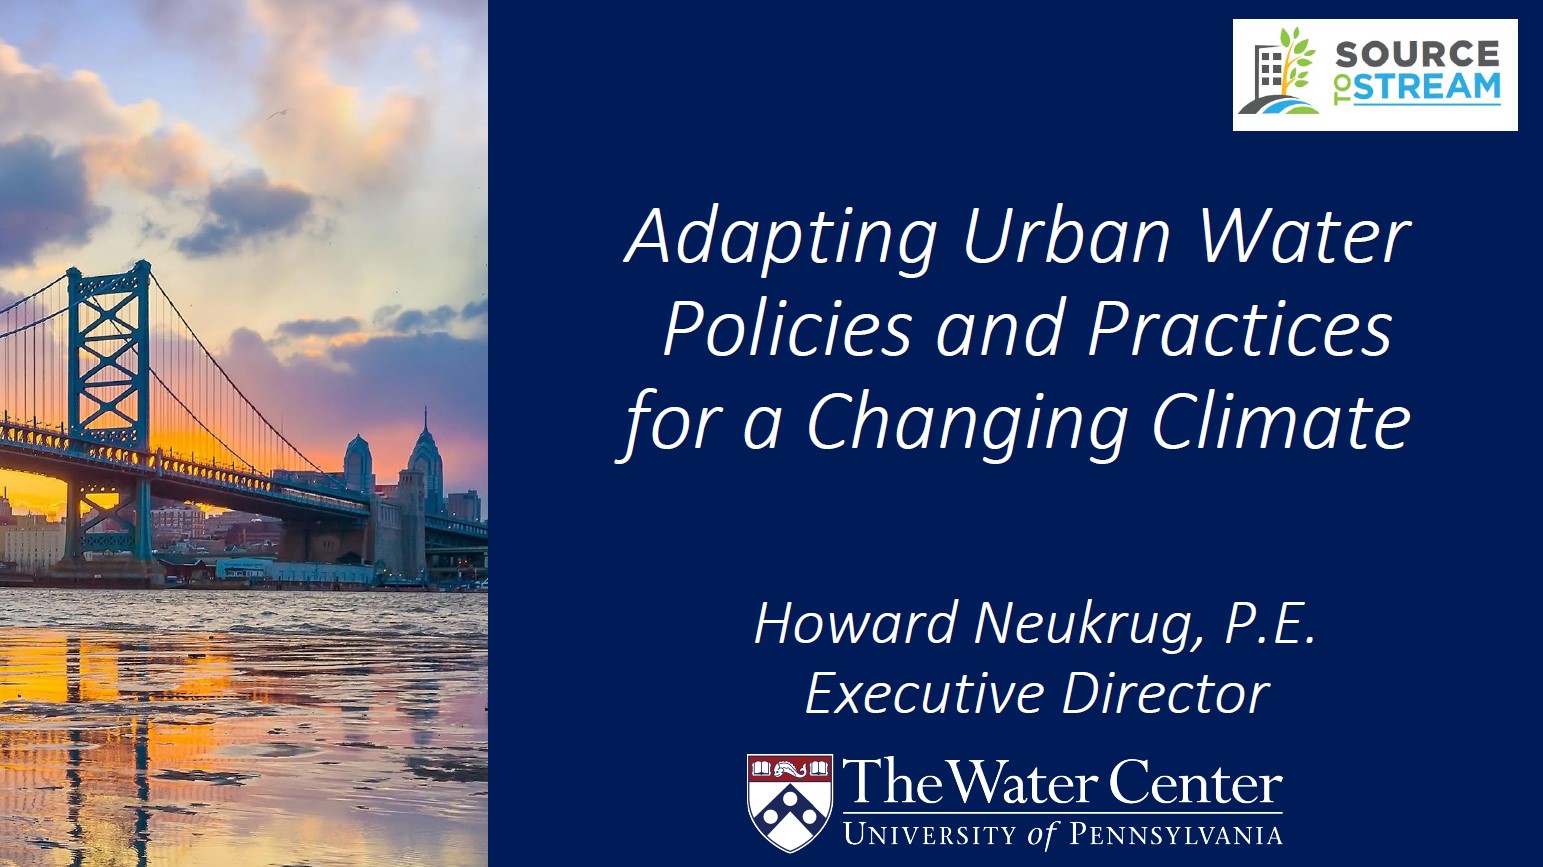 Urban Water Policies and Practices for a Changing Climate - presented by Howard Neukrug - University of Pennsylvania Water Center